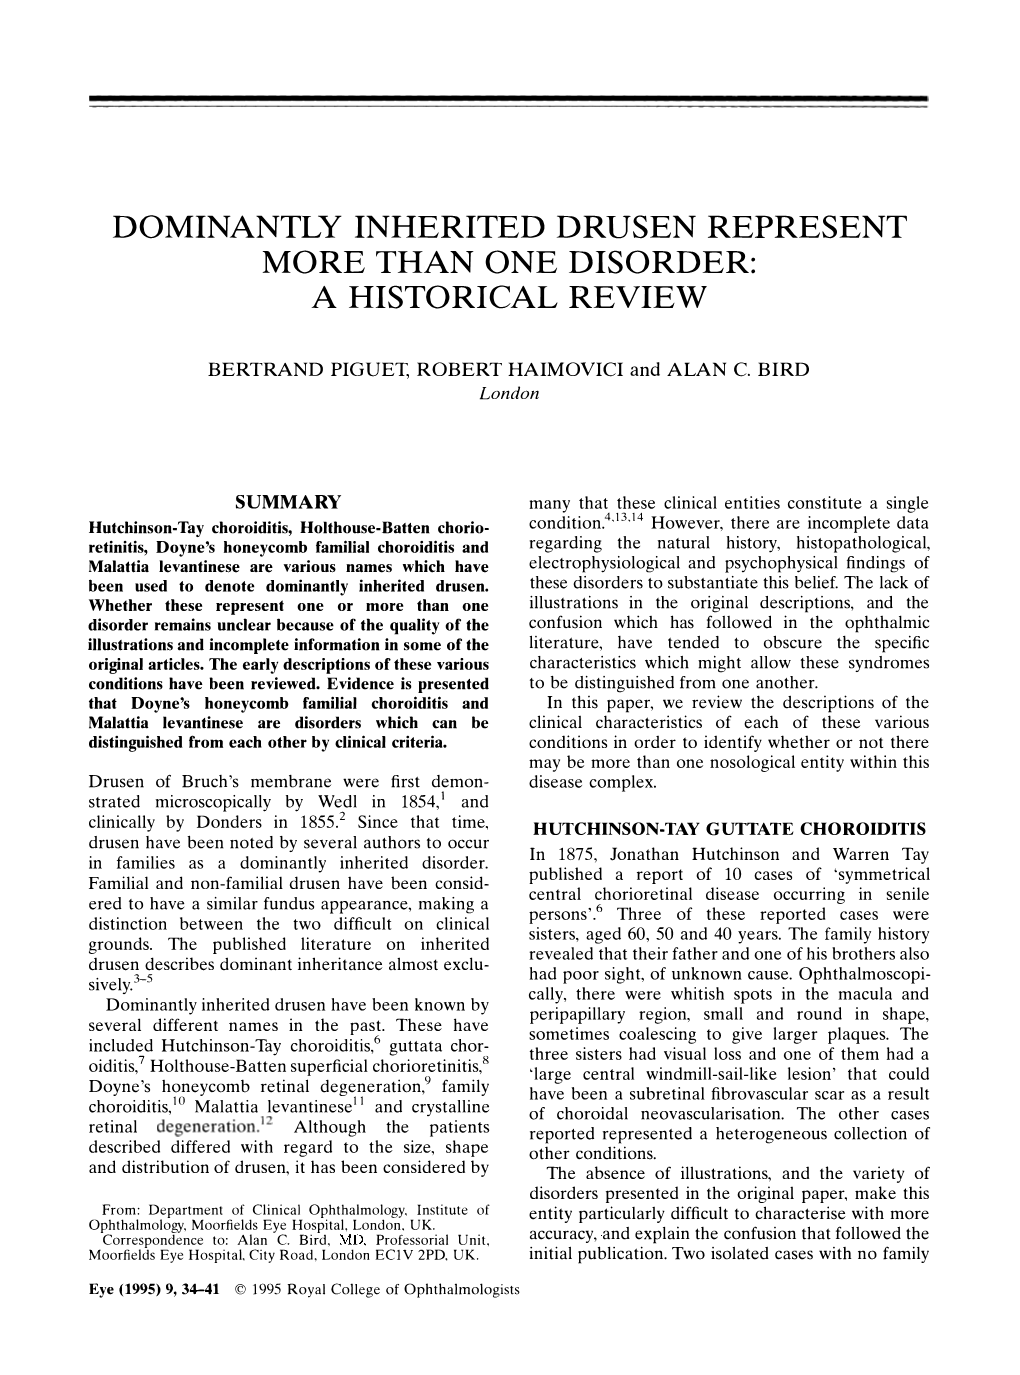 Dominantly Inherited Drusen Represent More Than One Disorder: a Historical Review